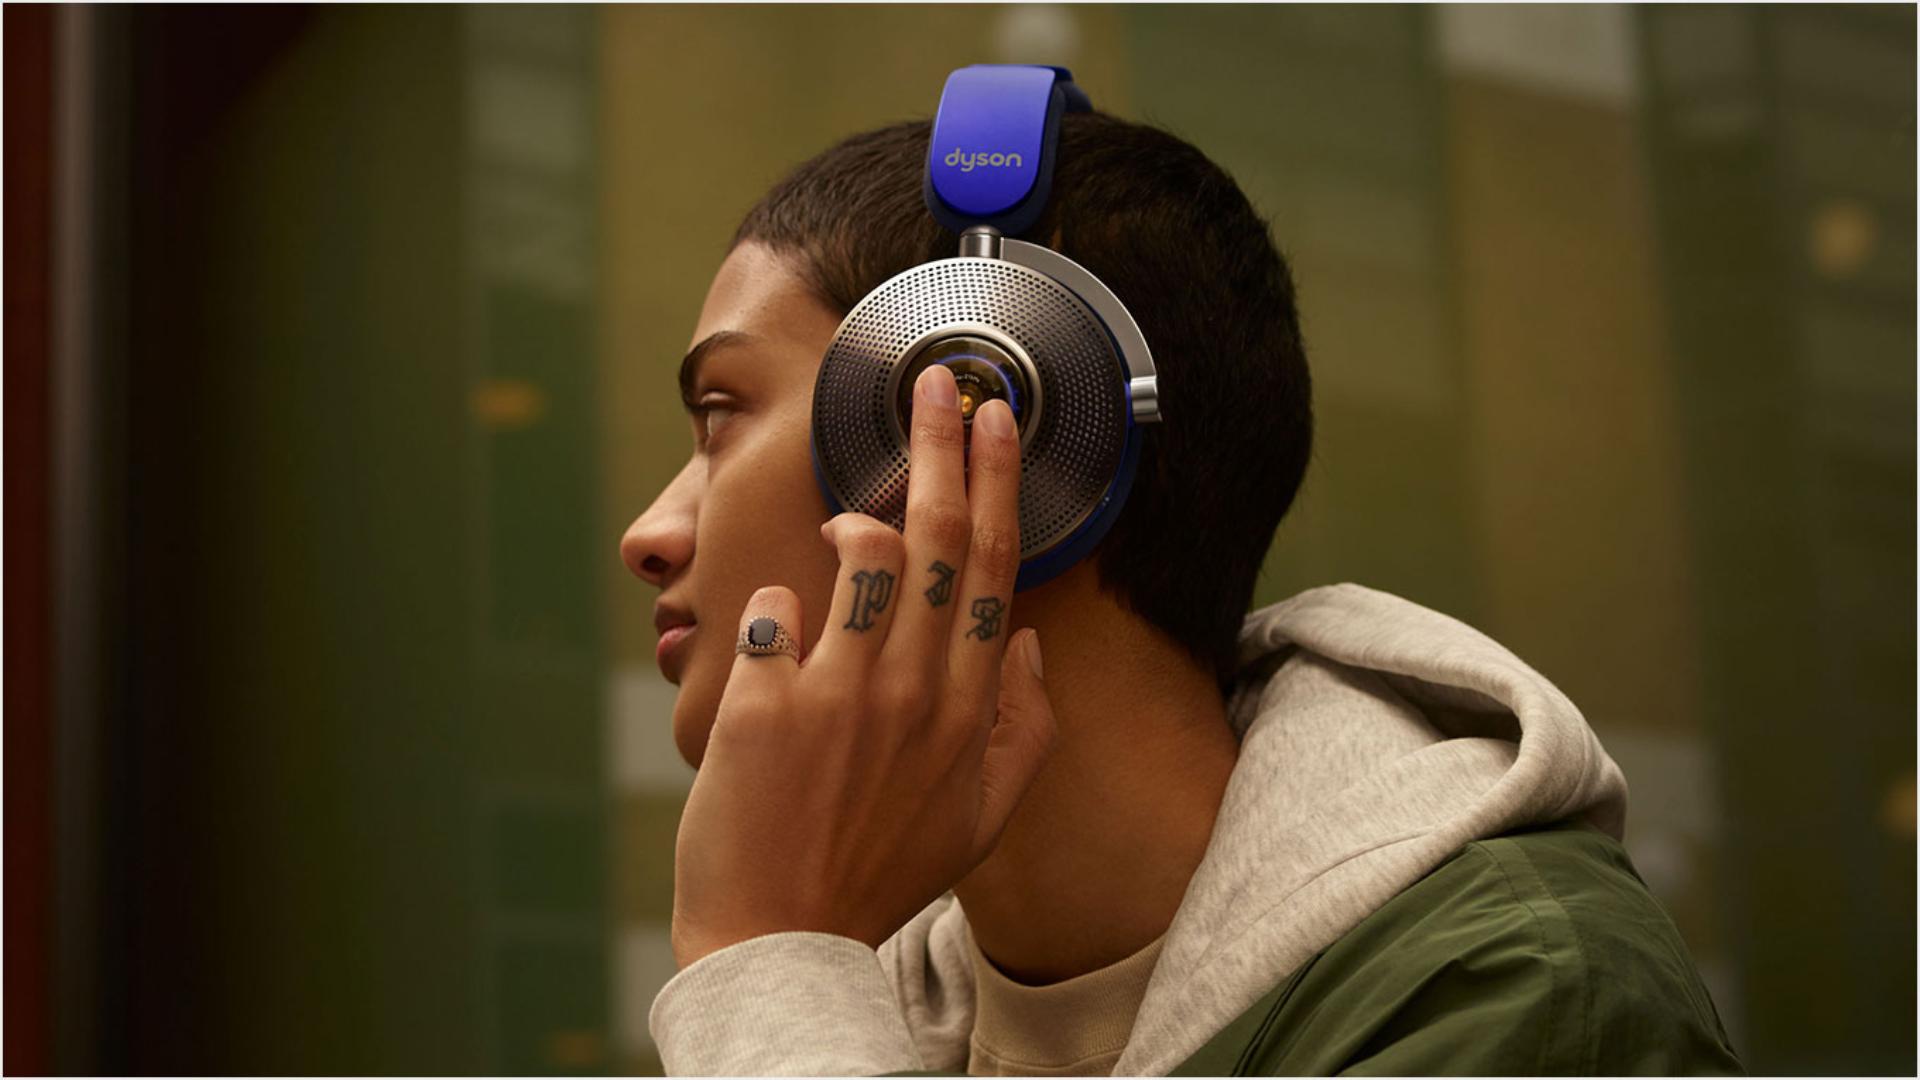 Woman wearing Dyson zone noise-cancelling headphones. She taps the back of the left ear cup.